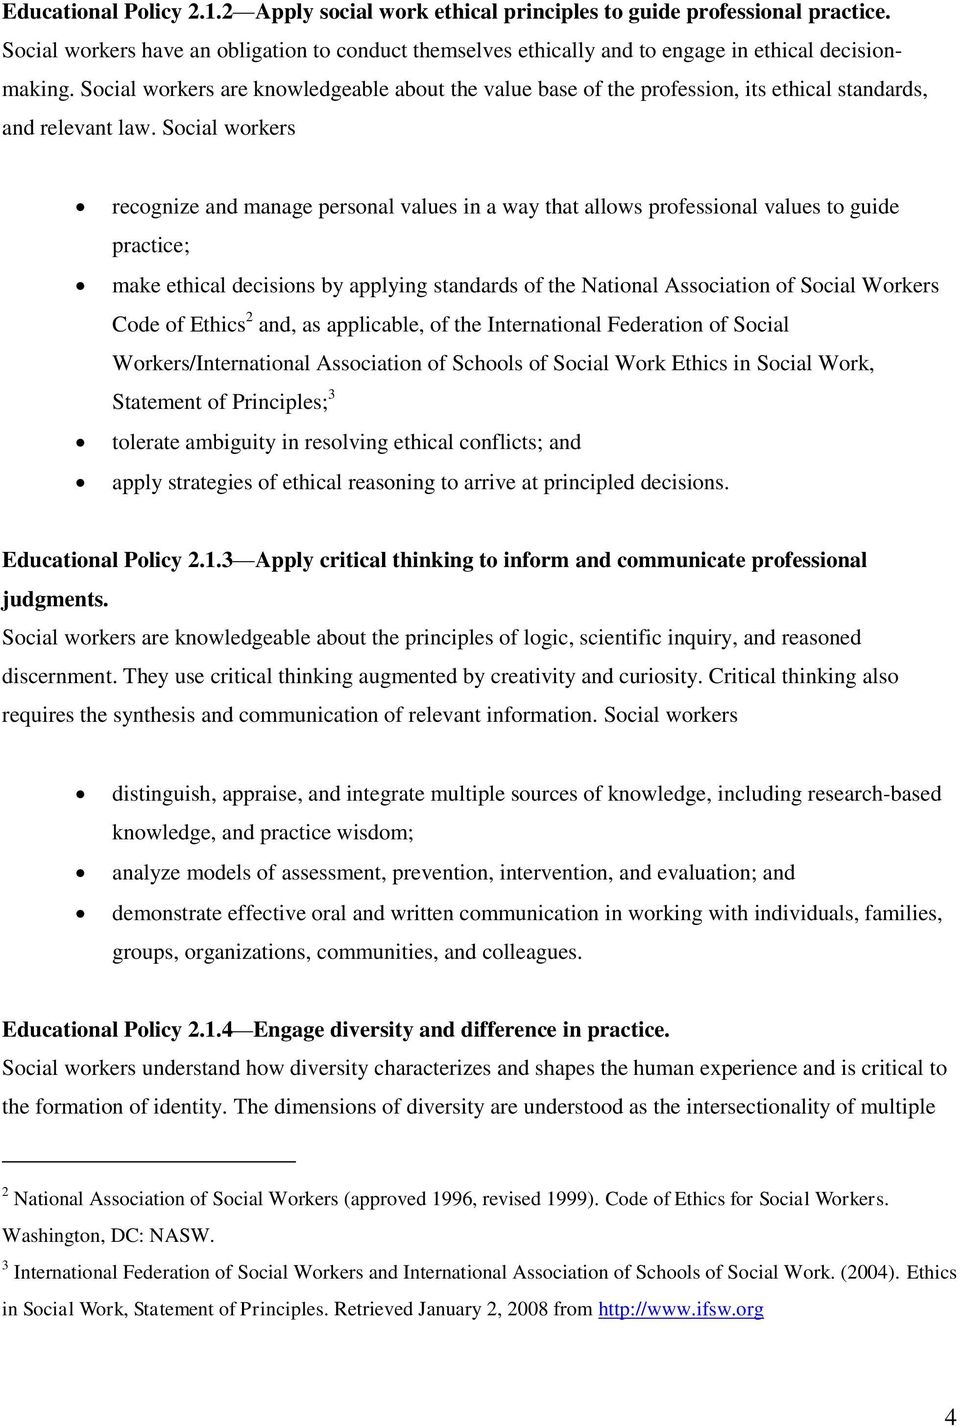 Social workers recognize and manage personal values in a way that allows professional values to guide practice; make ethical decisions by applying standards of the National Association of Social